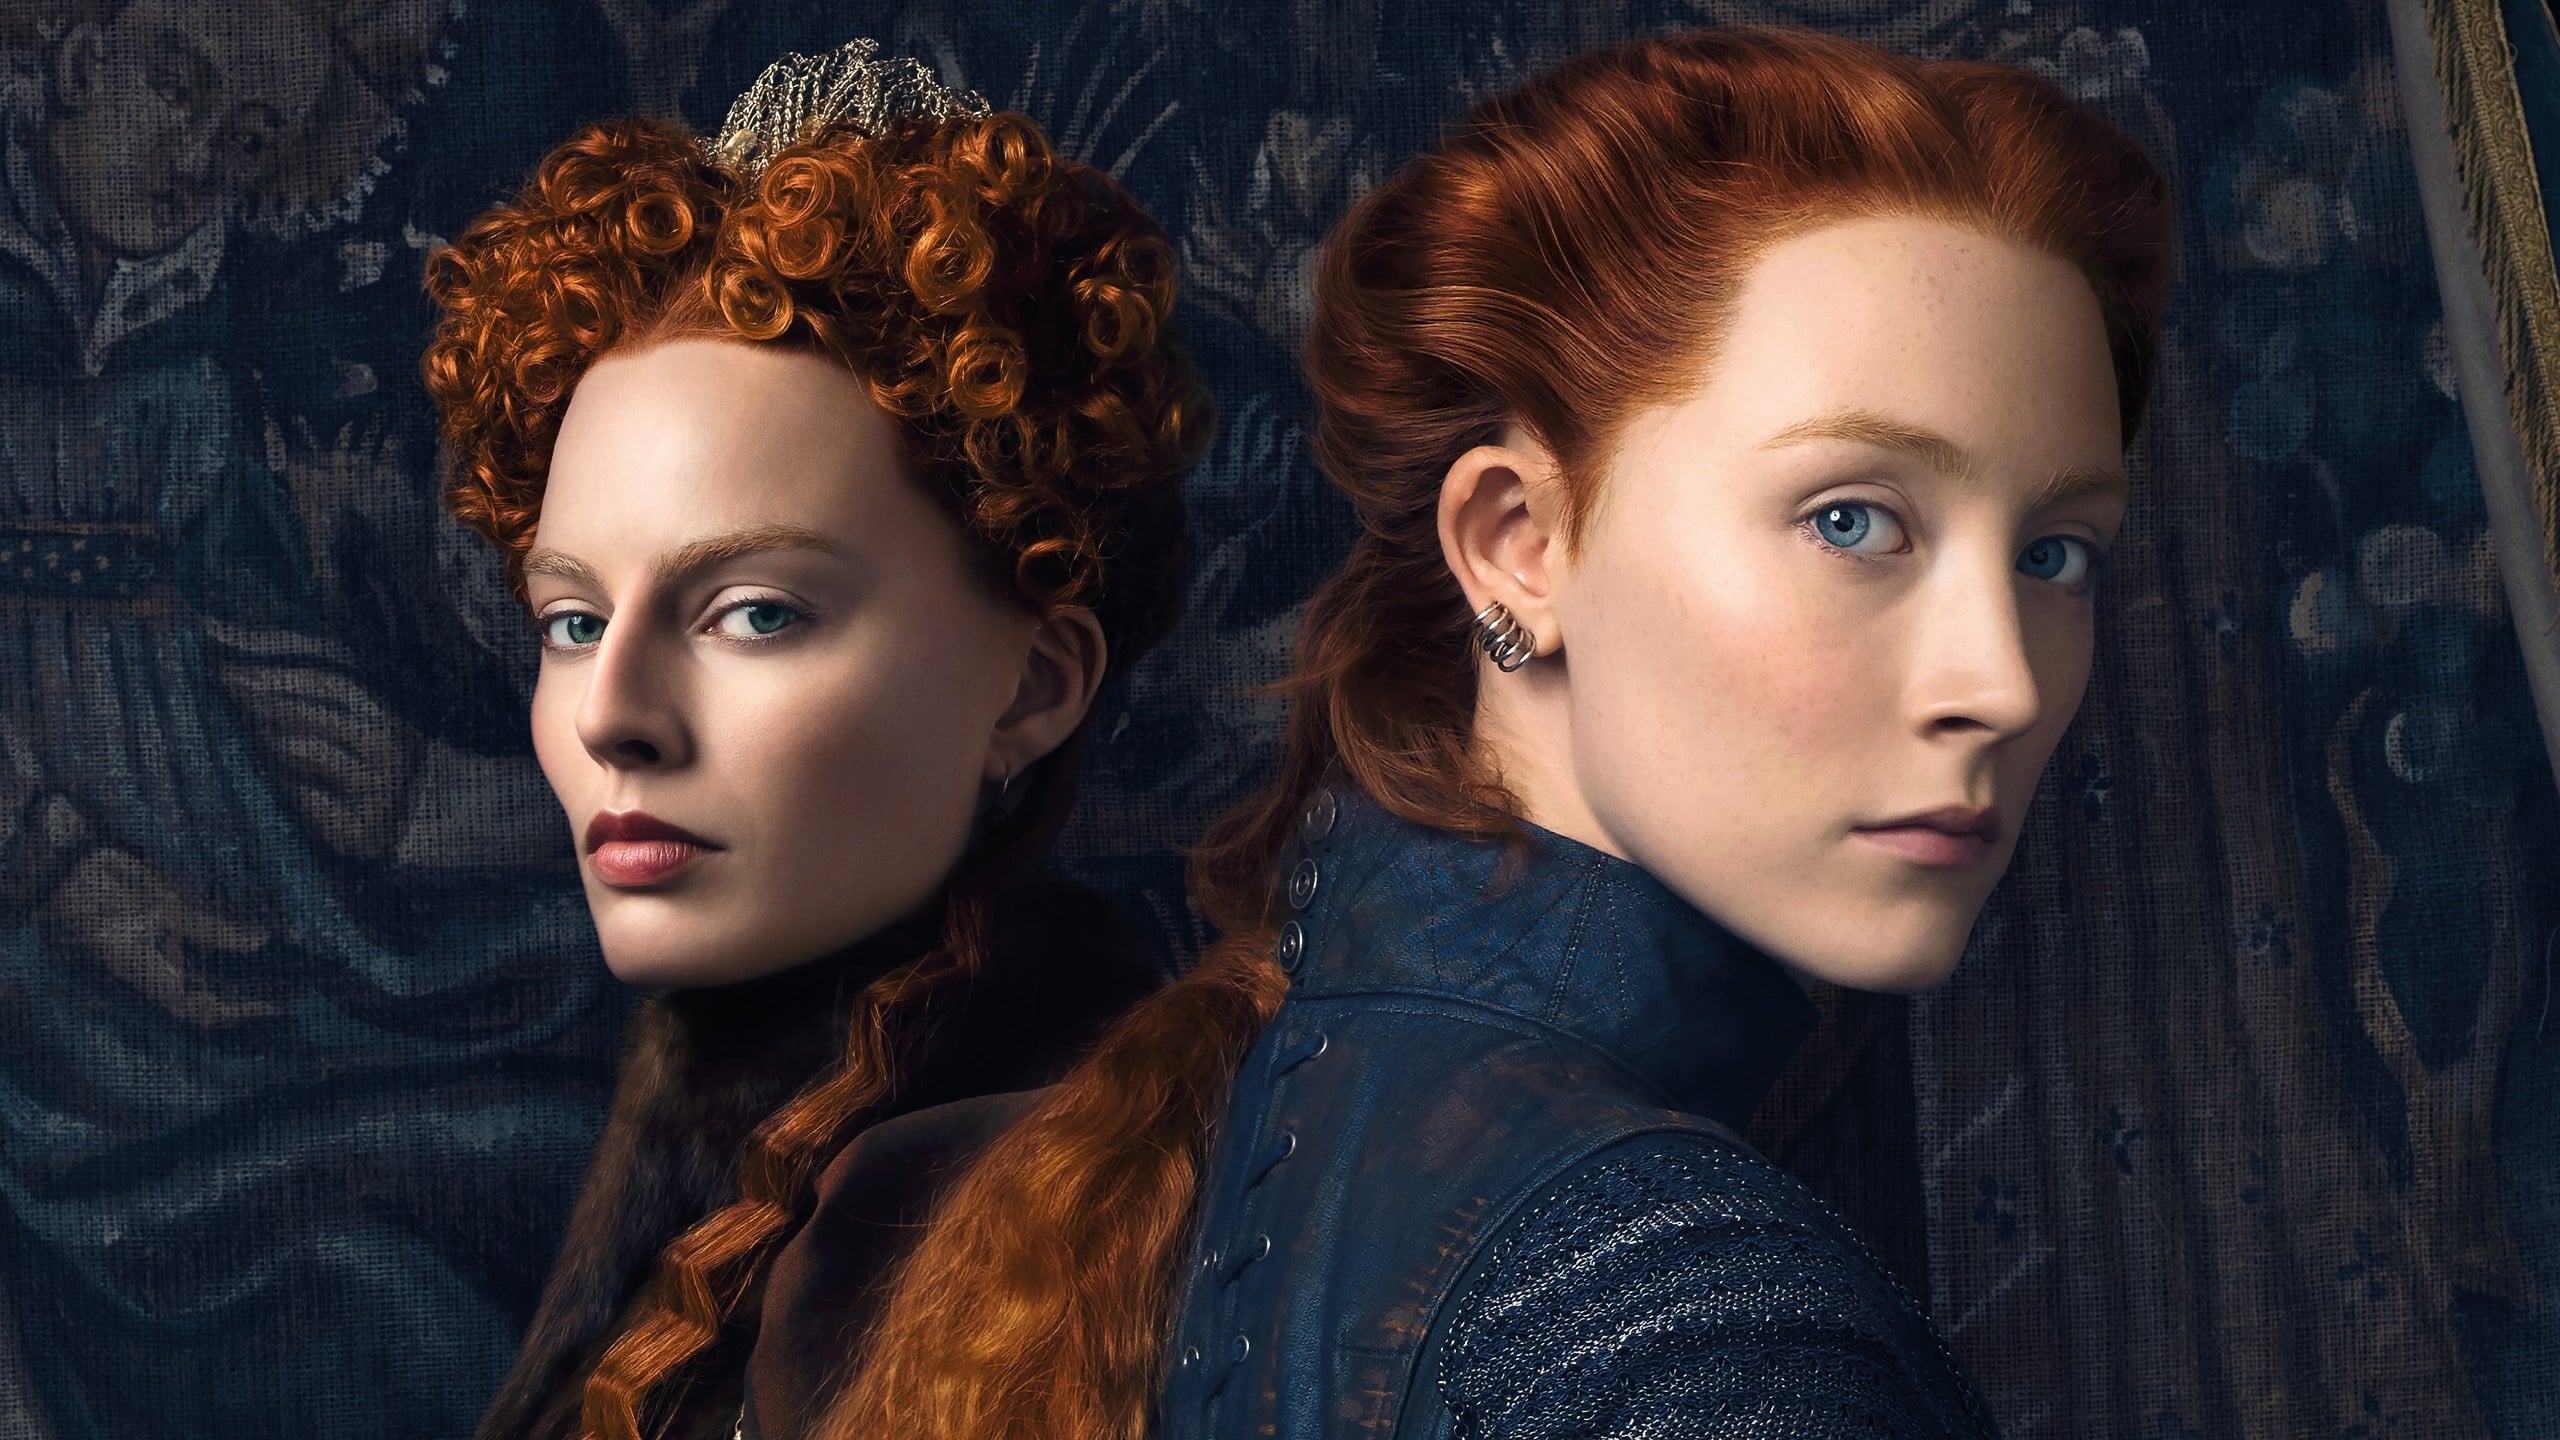 Banner Phim Nữ Hoàng Scotland (Mary Queen Of Scots)